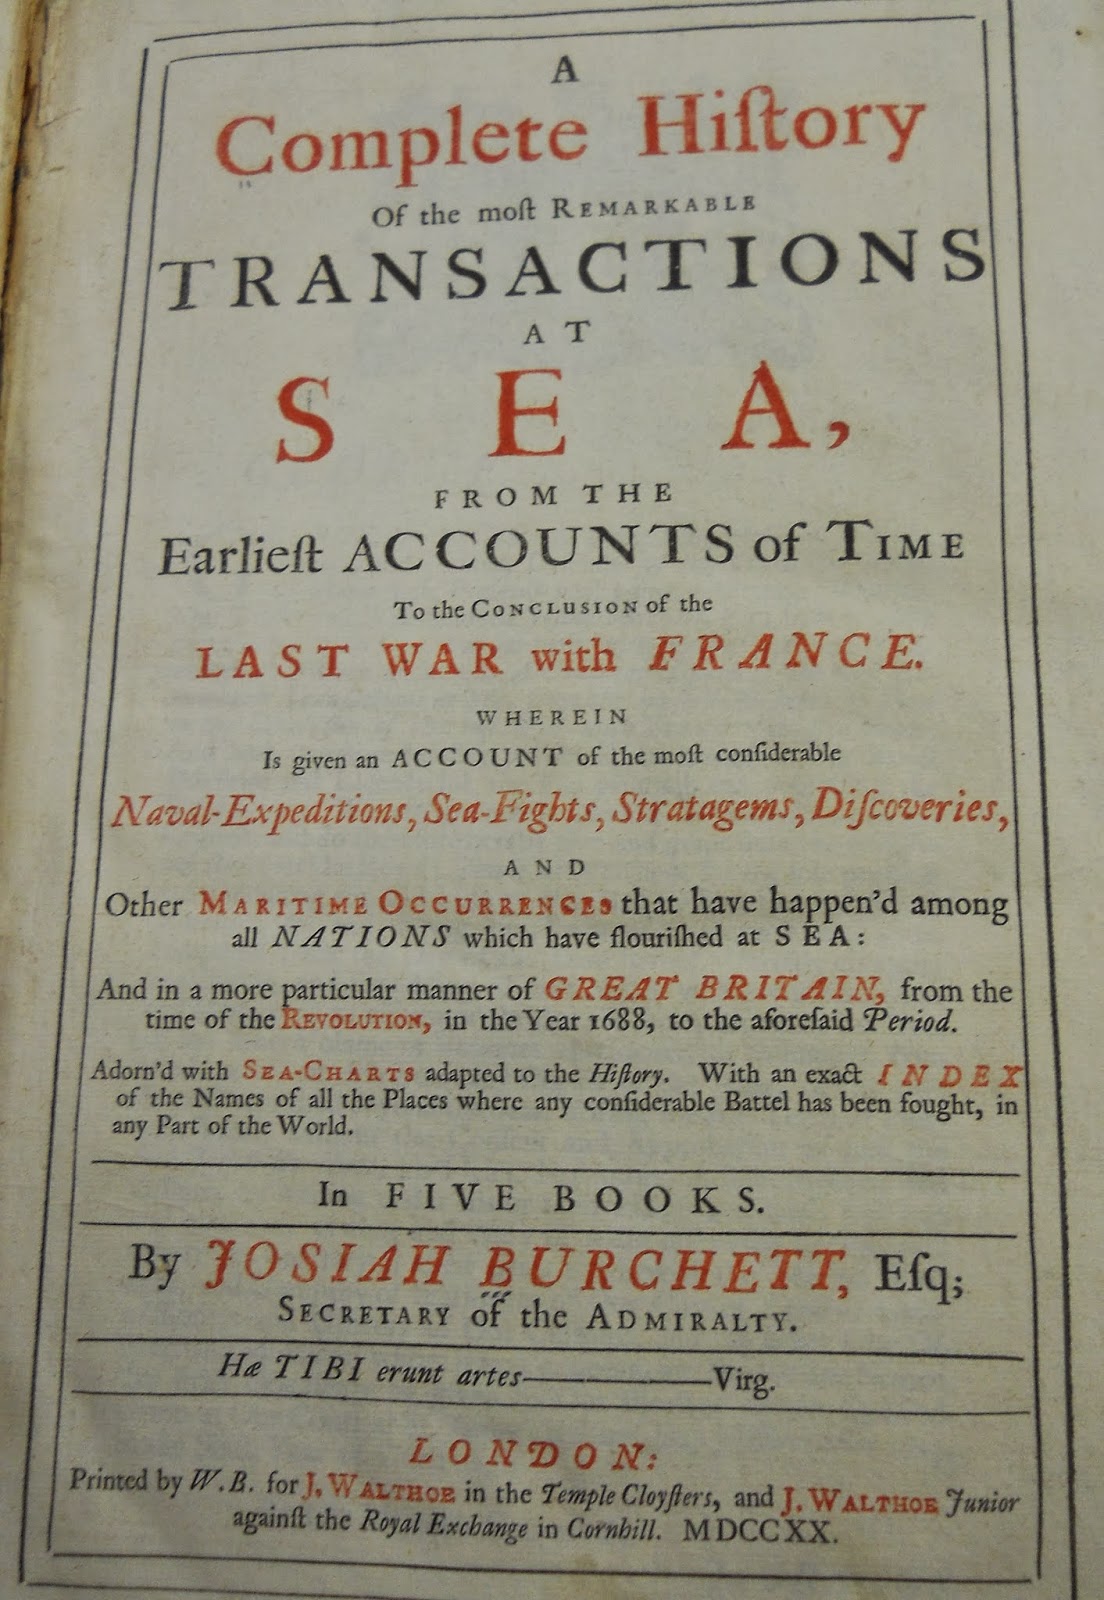 "A Complete History of the Most Remarkable Transactions at SEA, From the Earliest Accounts of Time to the Conclusion of the Last war with France"